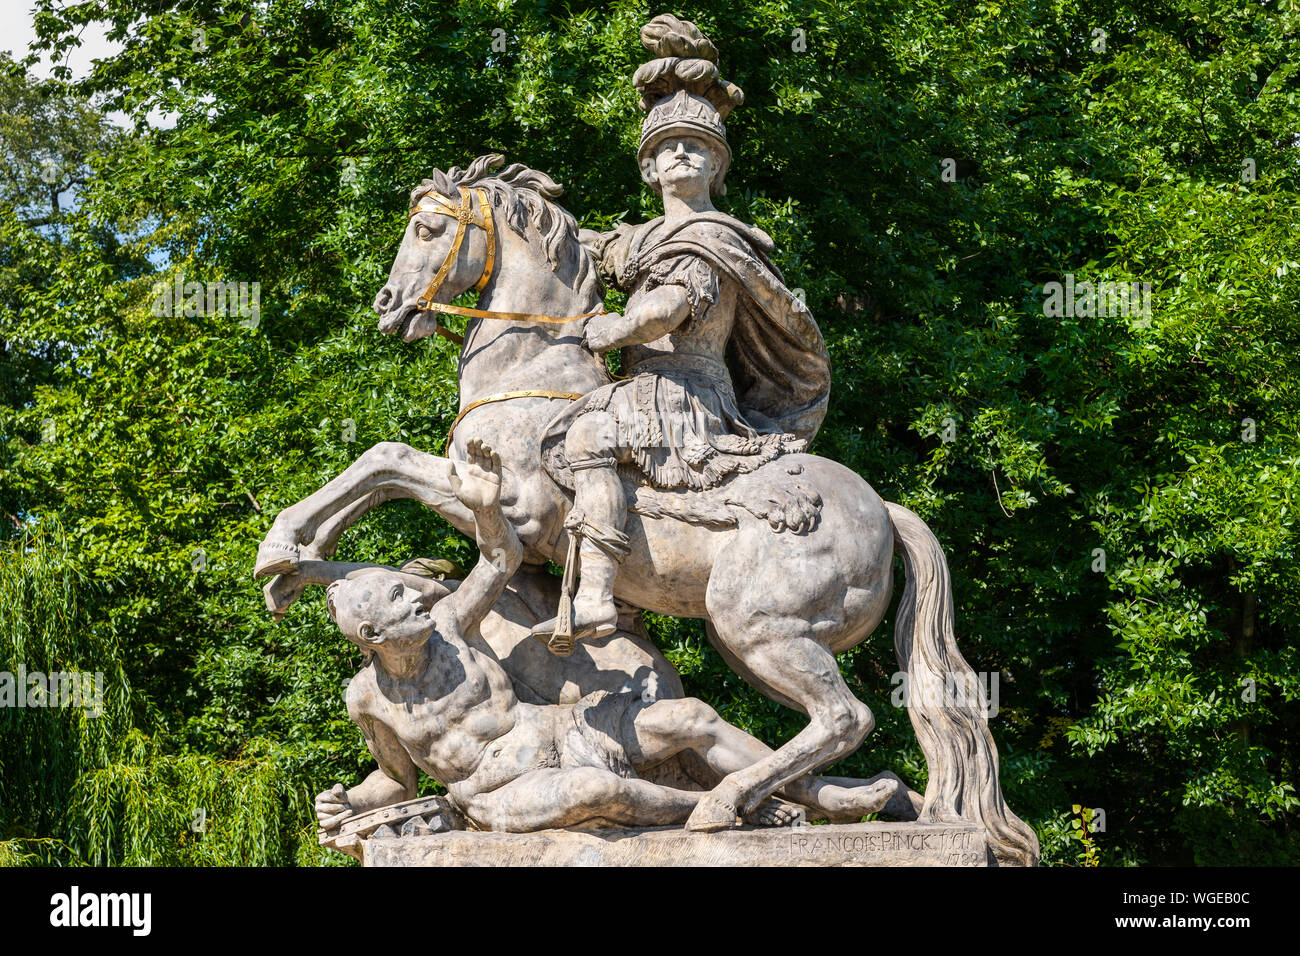 King Jan III Sobieski monument in Warsaw, Poland. Baroque equestrian statue from 1788. Stock Photo